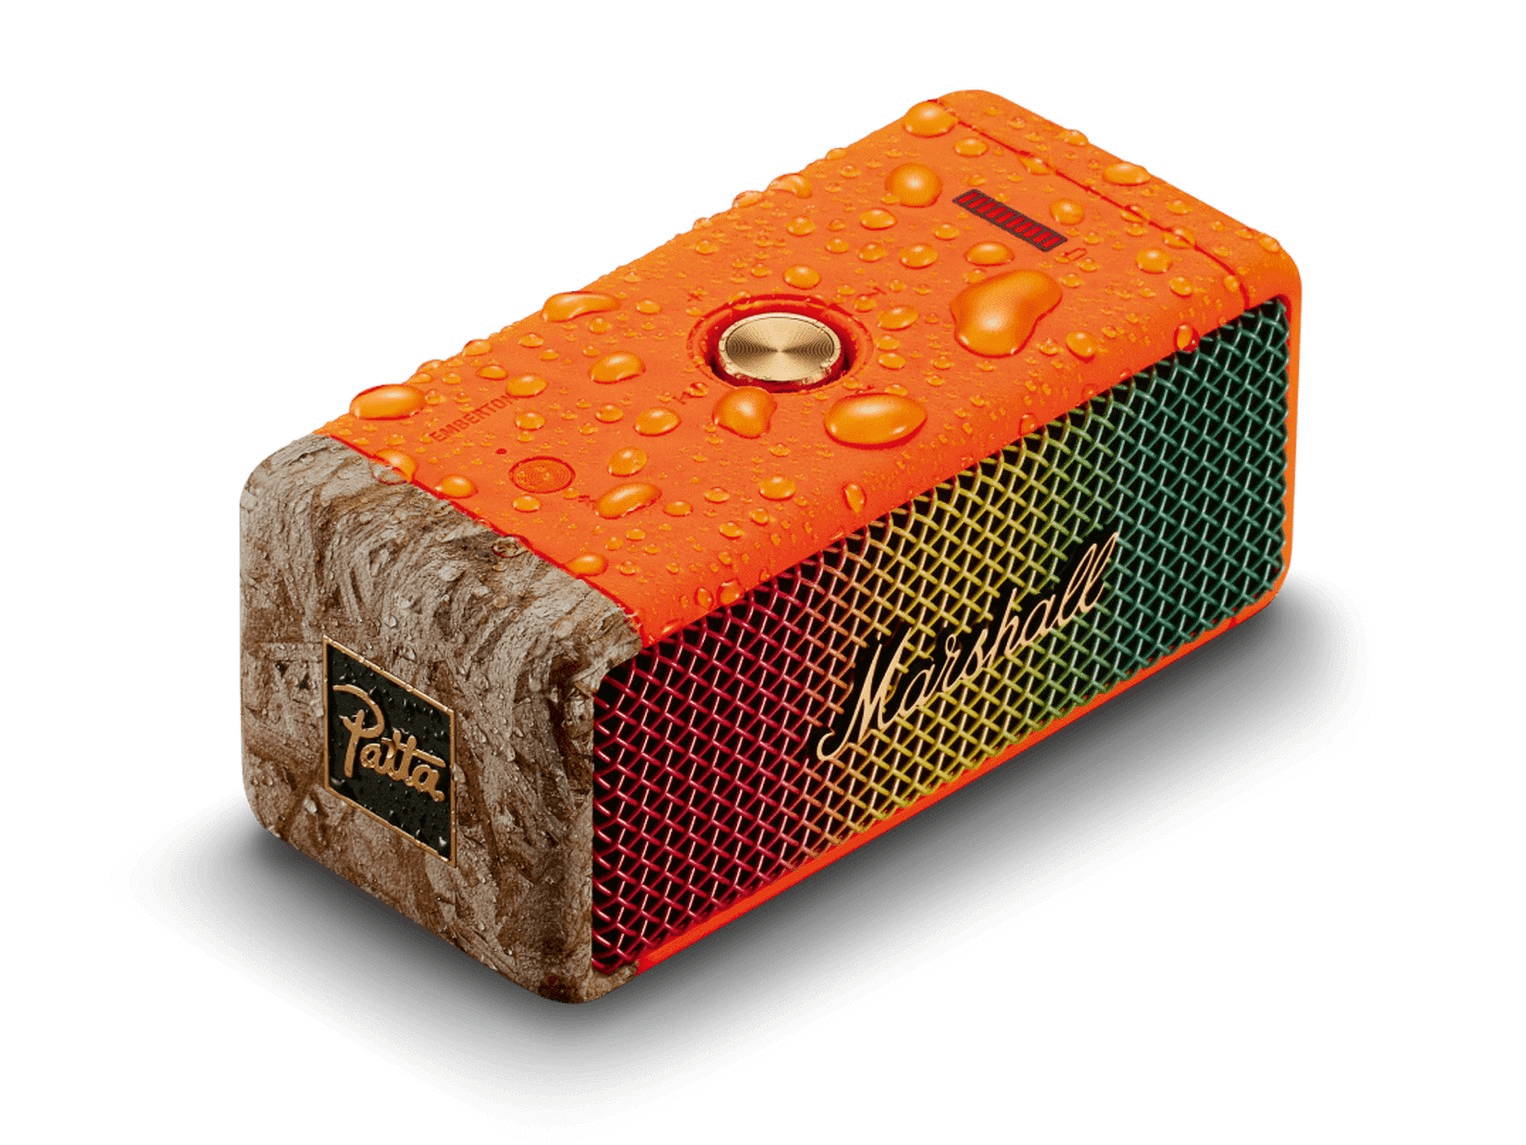 A top angle view of Marshall Emberton II Patta Edition portable speaker.